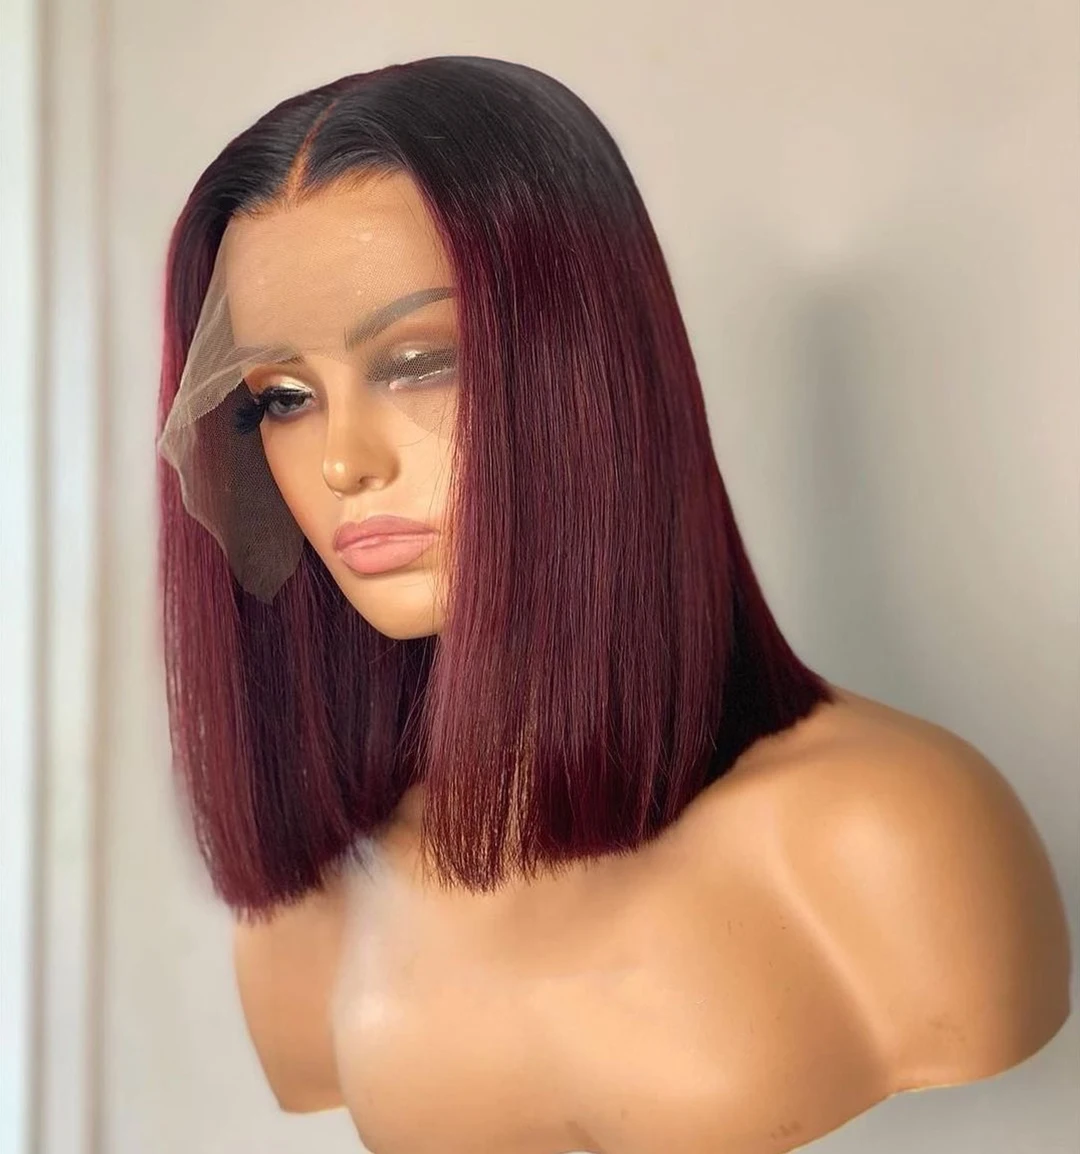 

Short Bob 13x6 Lace Front Wig 1B 99J Straight Burgundy Human Hair Wig Brazilian Remy Pre Plucked Ombre Wine Red 180 Density